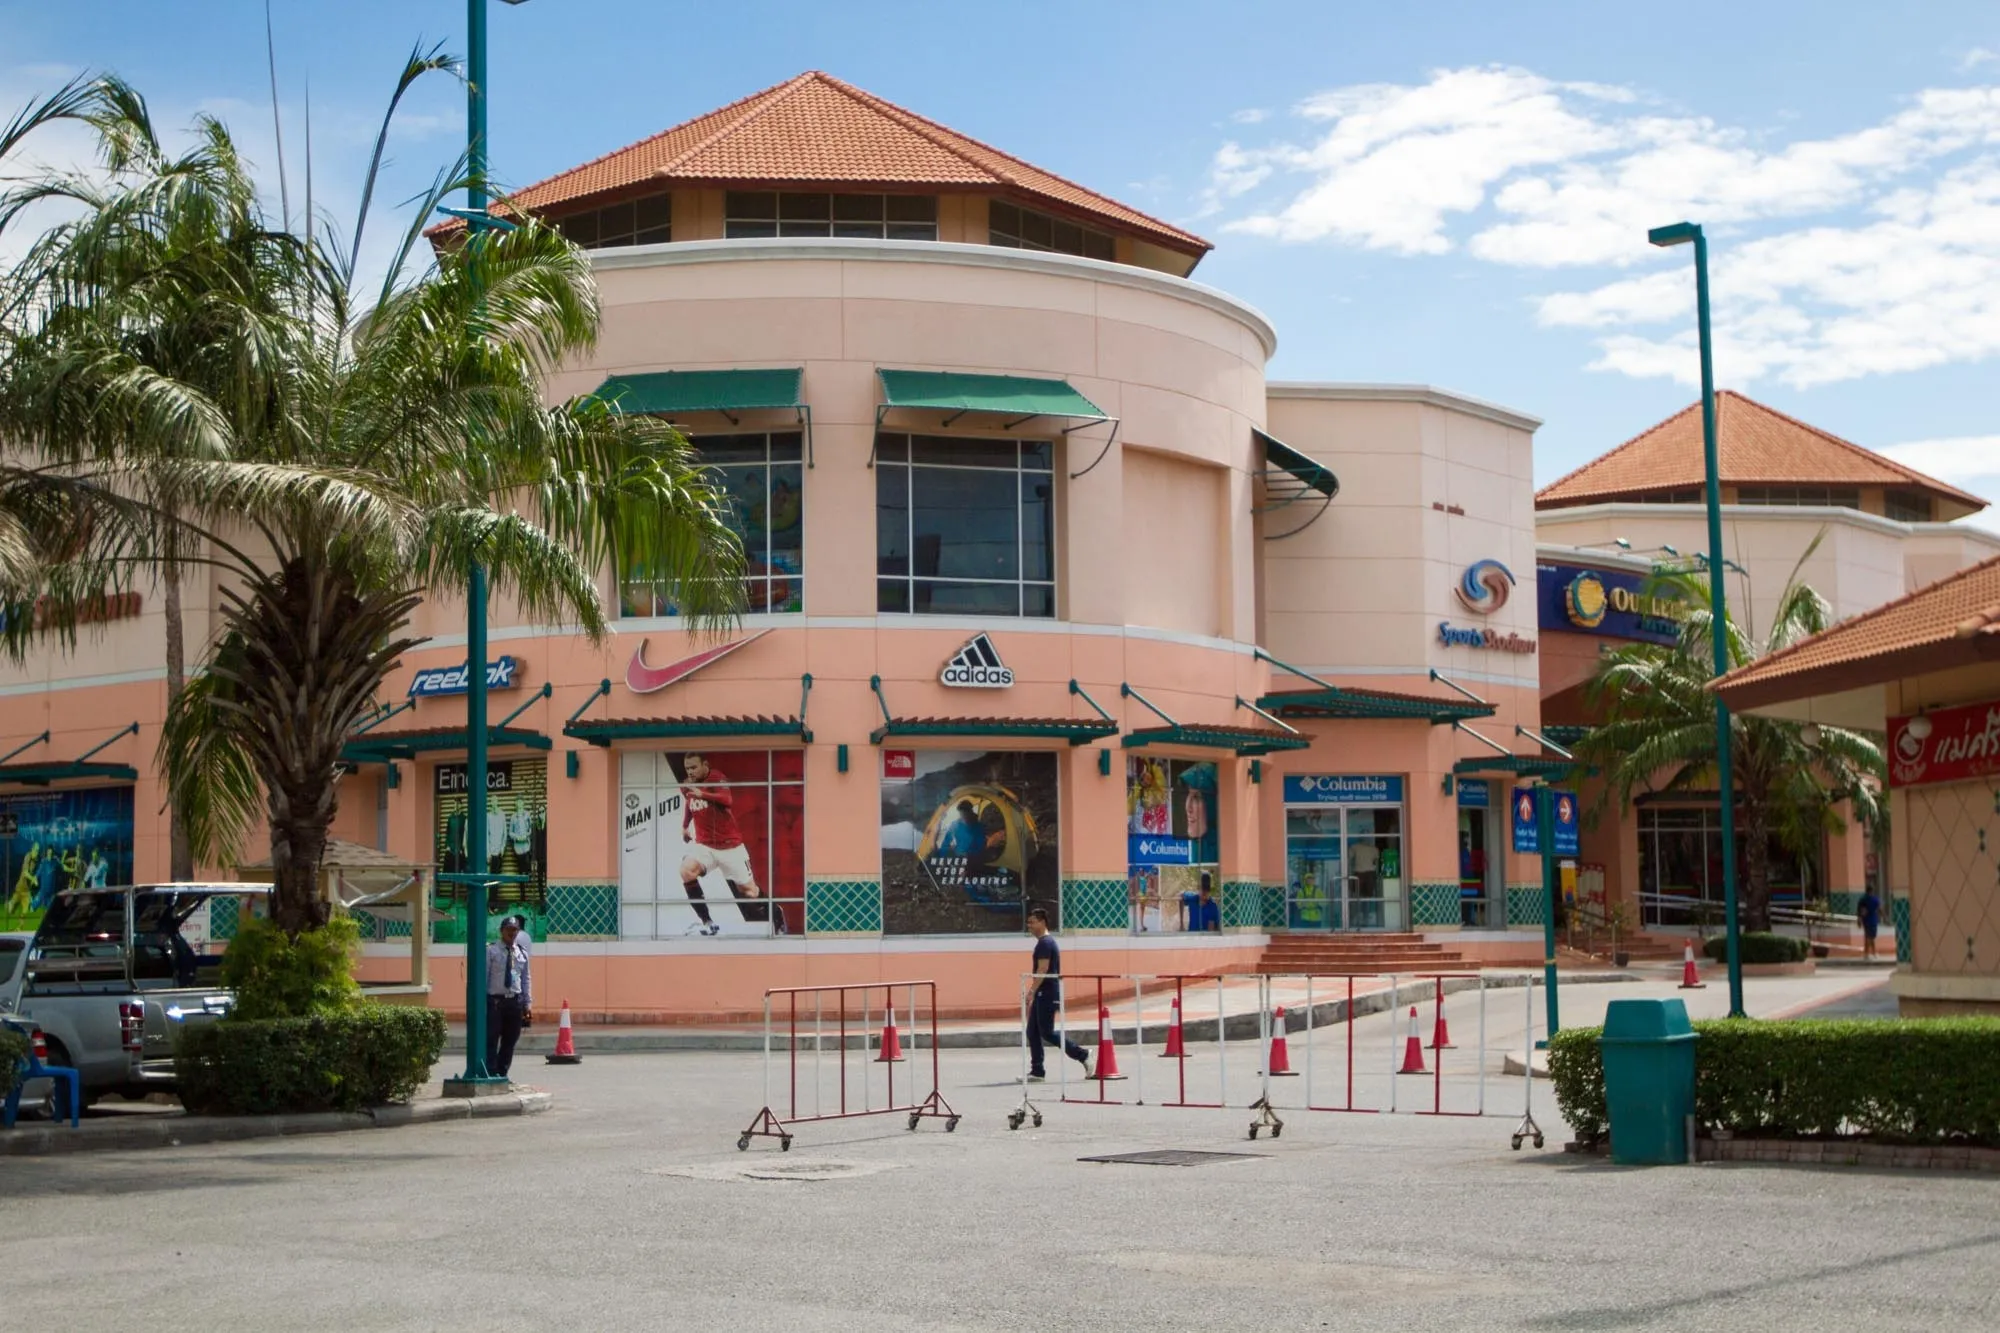 Outlet Mall Pattaya in Thailand, central_asia | Fragrance,Handbags,Accessories,Clothes,Cosmetics,Swimwear - Country Helper